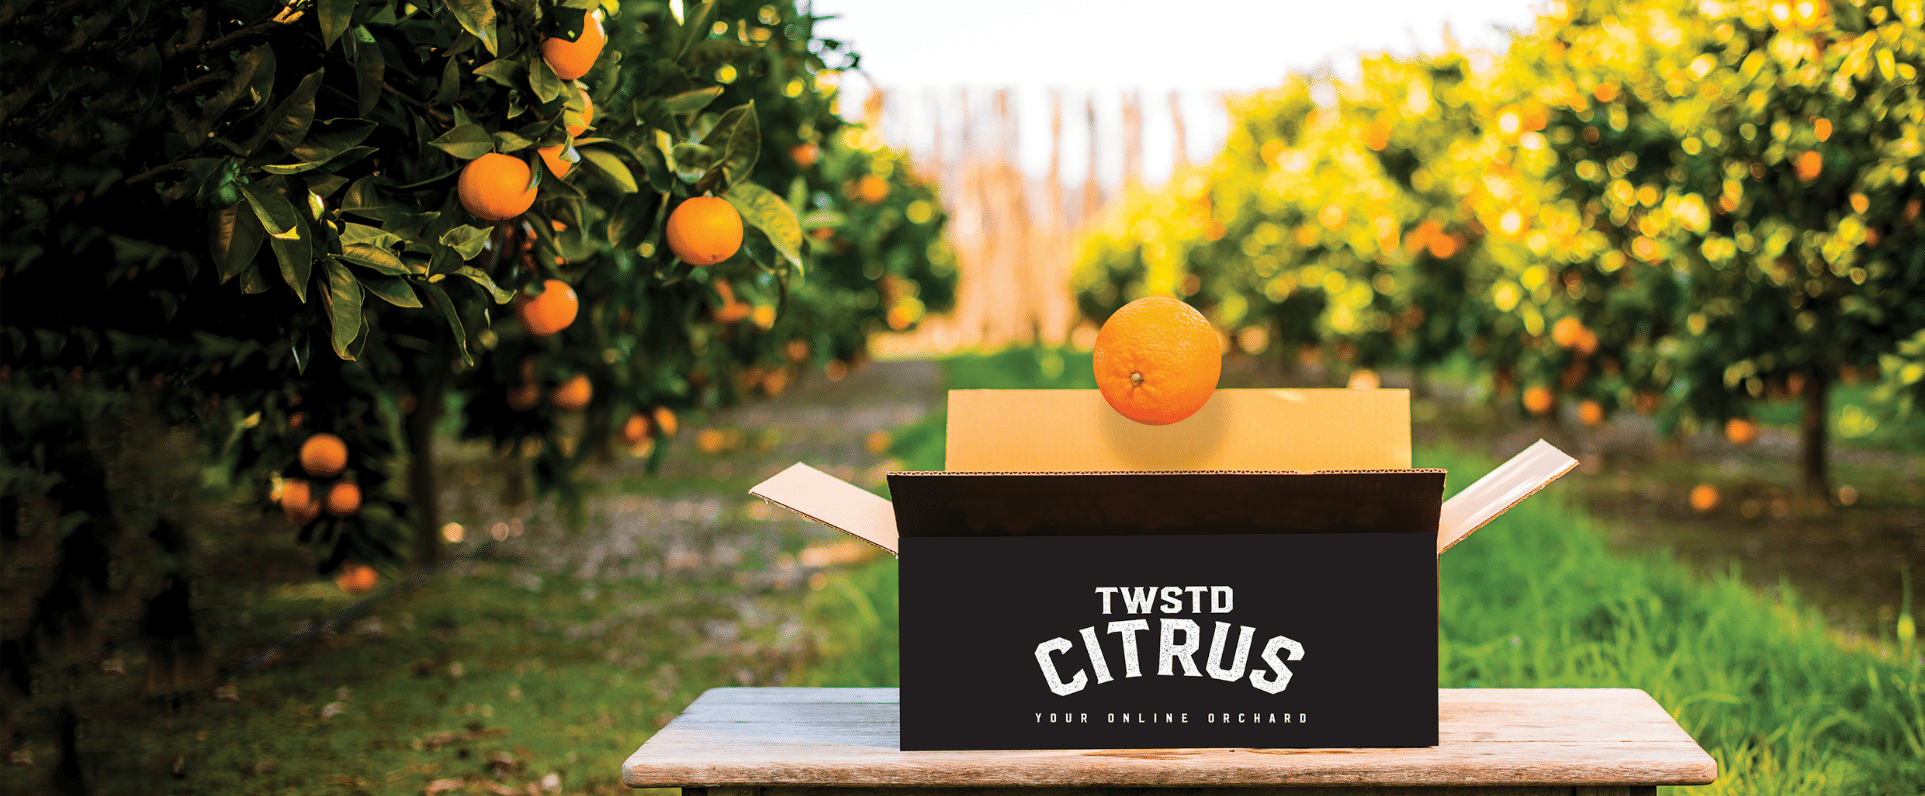 Twisted Citrus Add a heading (1).png